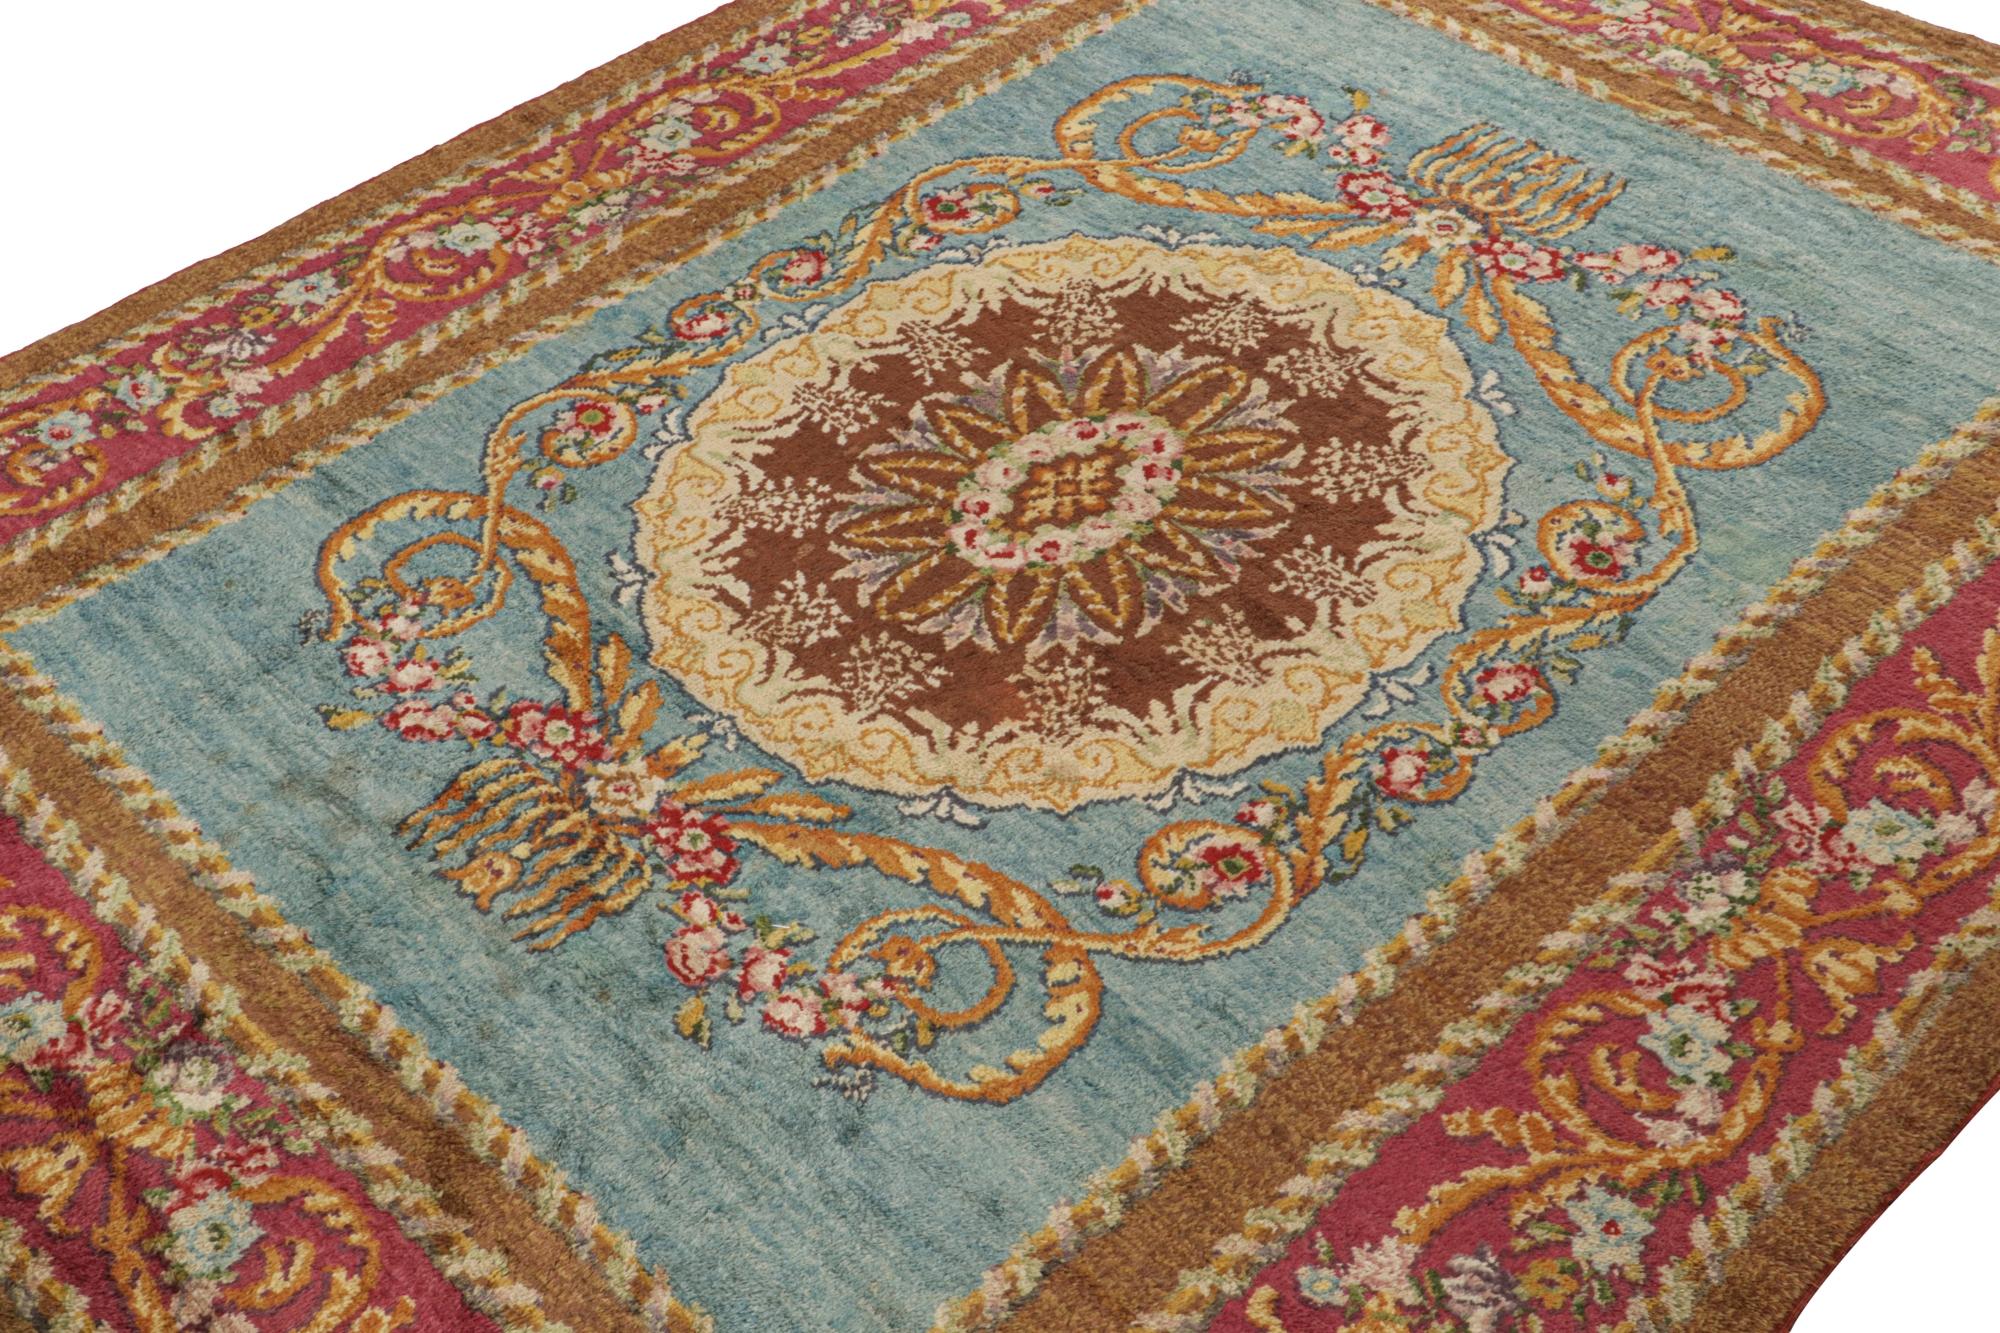 Joining Antique & Vintage collection, this 11x14 rug is a rare antique Savonnerie rug—hand-knotted in wool circa 1890-1900. 

On the Design: 

This rug embodies the grandiose sensibility of the titular European styles with an elaborate central